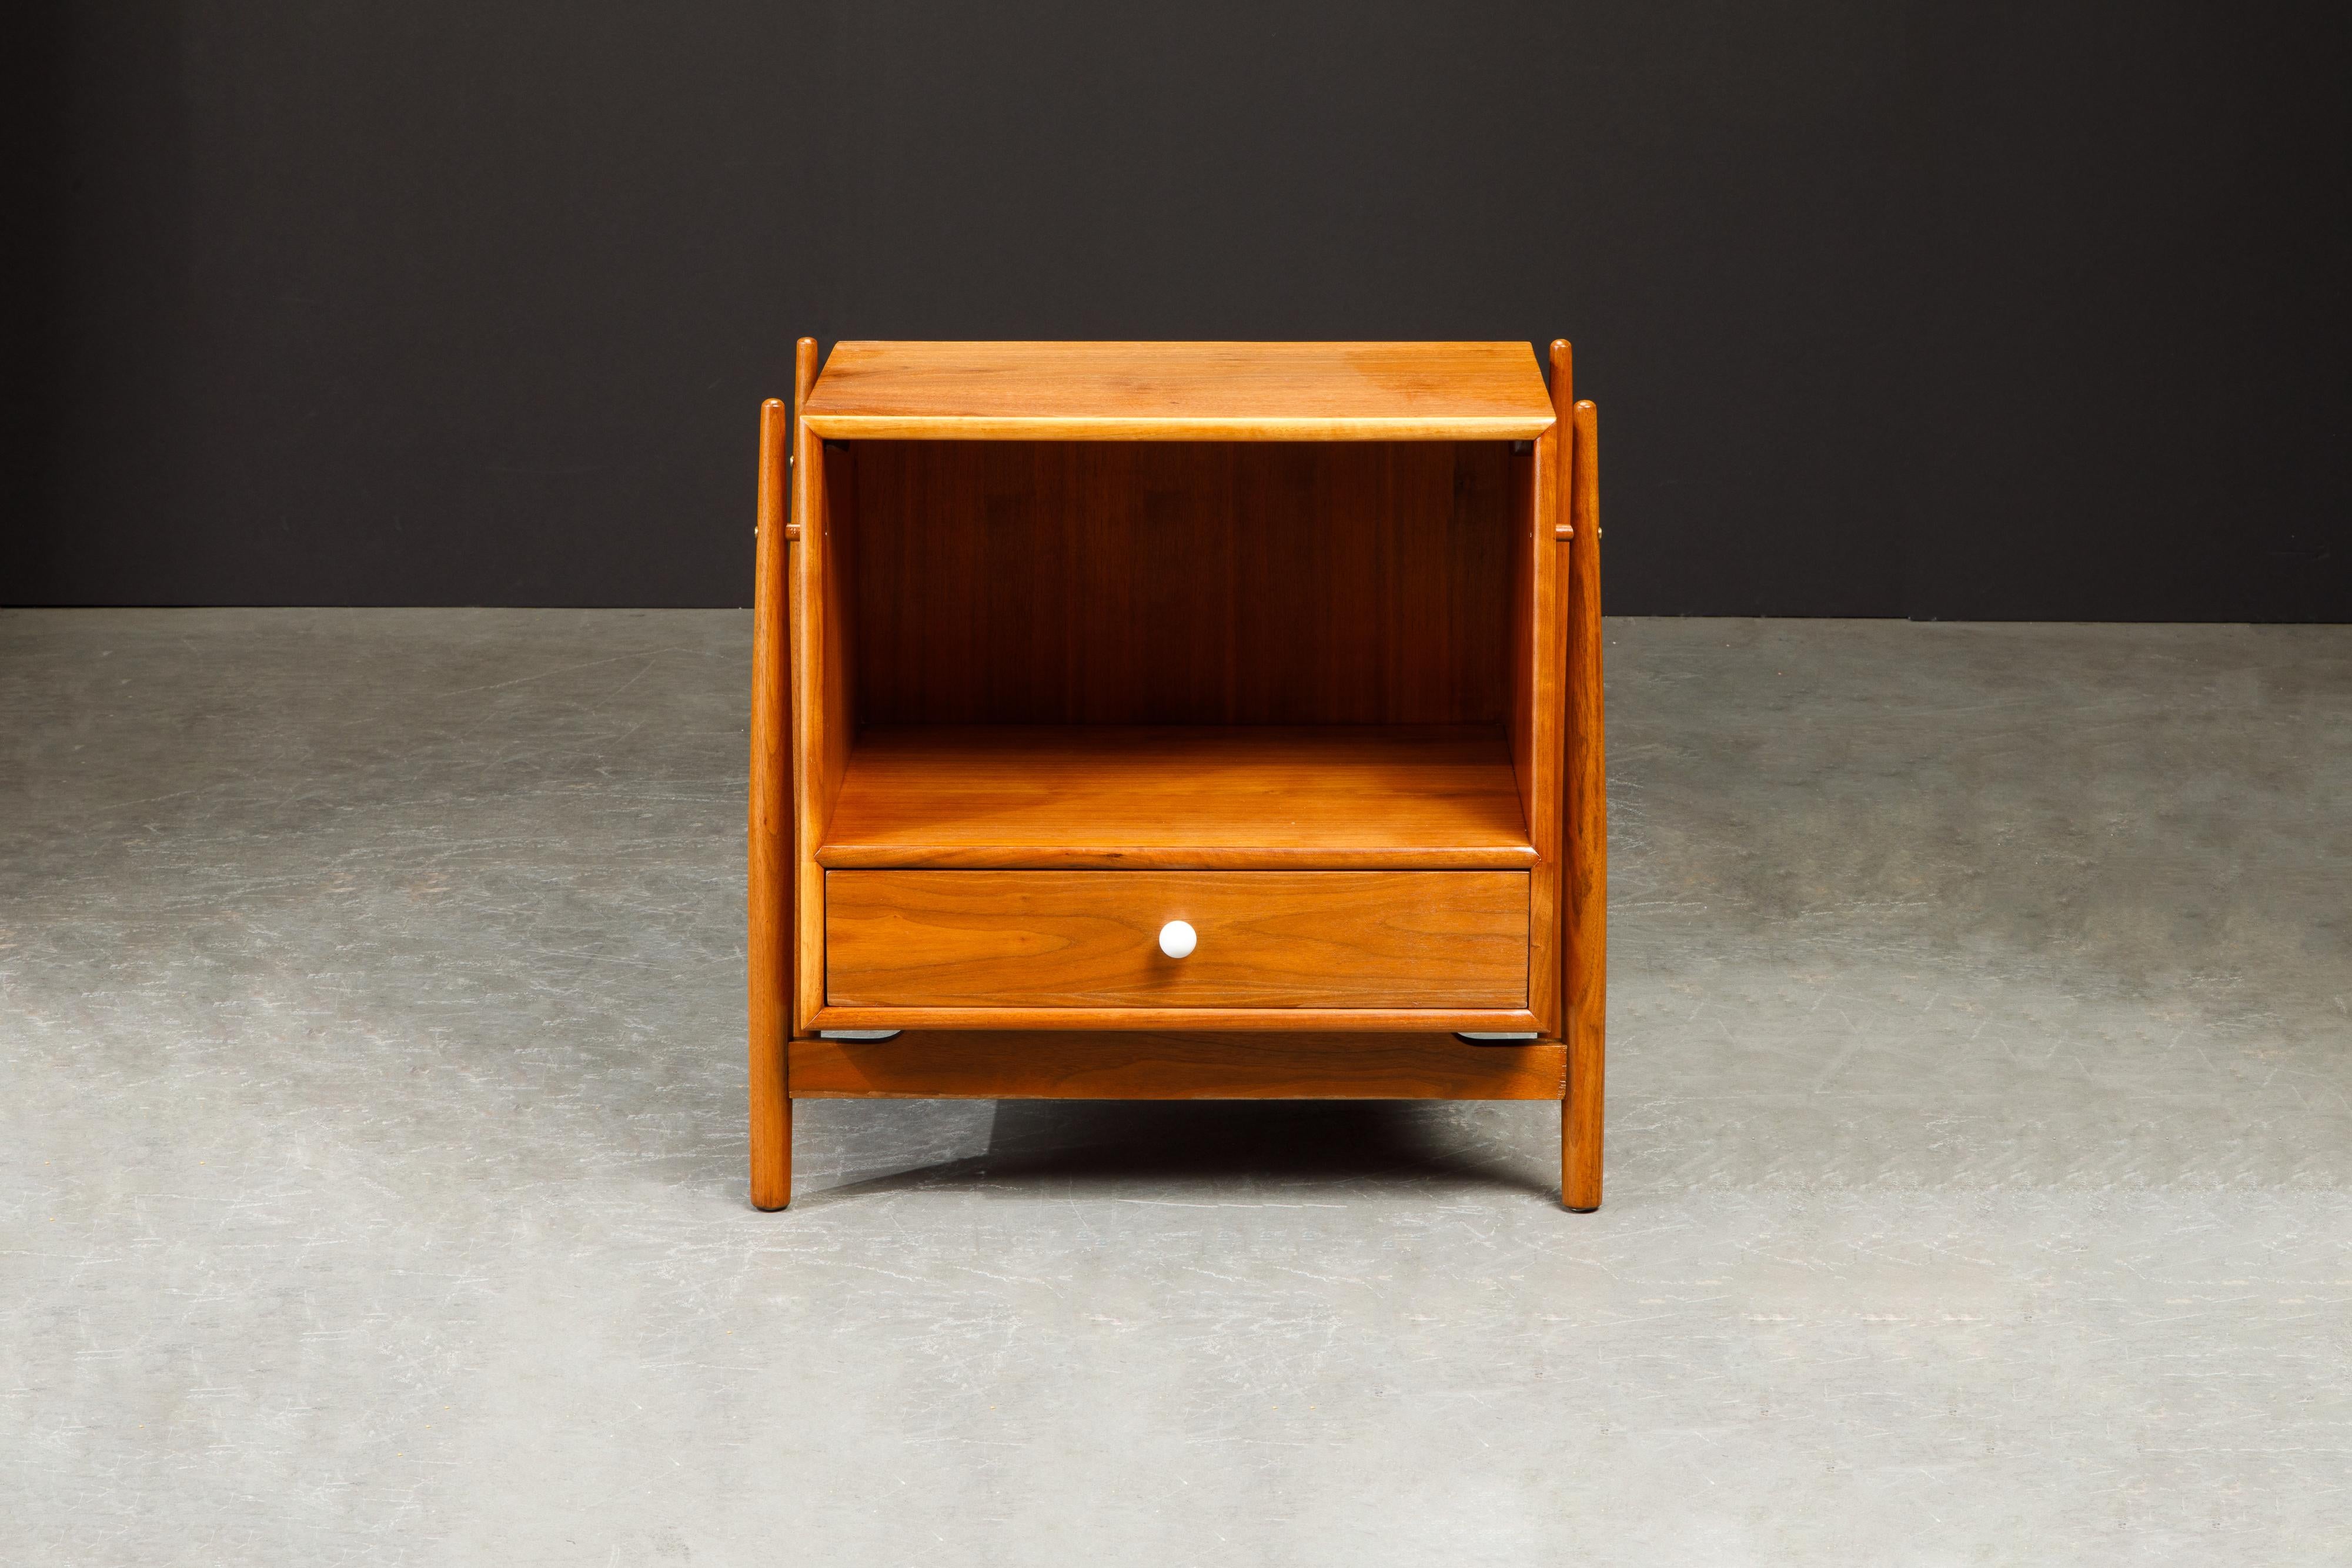 Exceptional refinished 1950's Mid-Century Modern nightstand or can also be used as a side or end table, designed by Kipp Stewart and Stewart McDougall as part of the 'Declaration' line for Drexel furniture. This design being the most coveted and